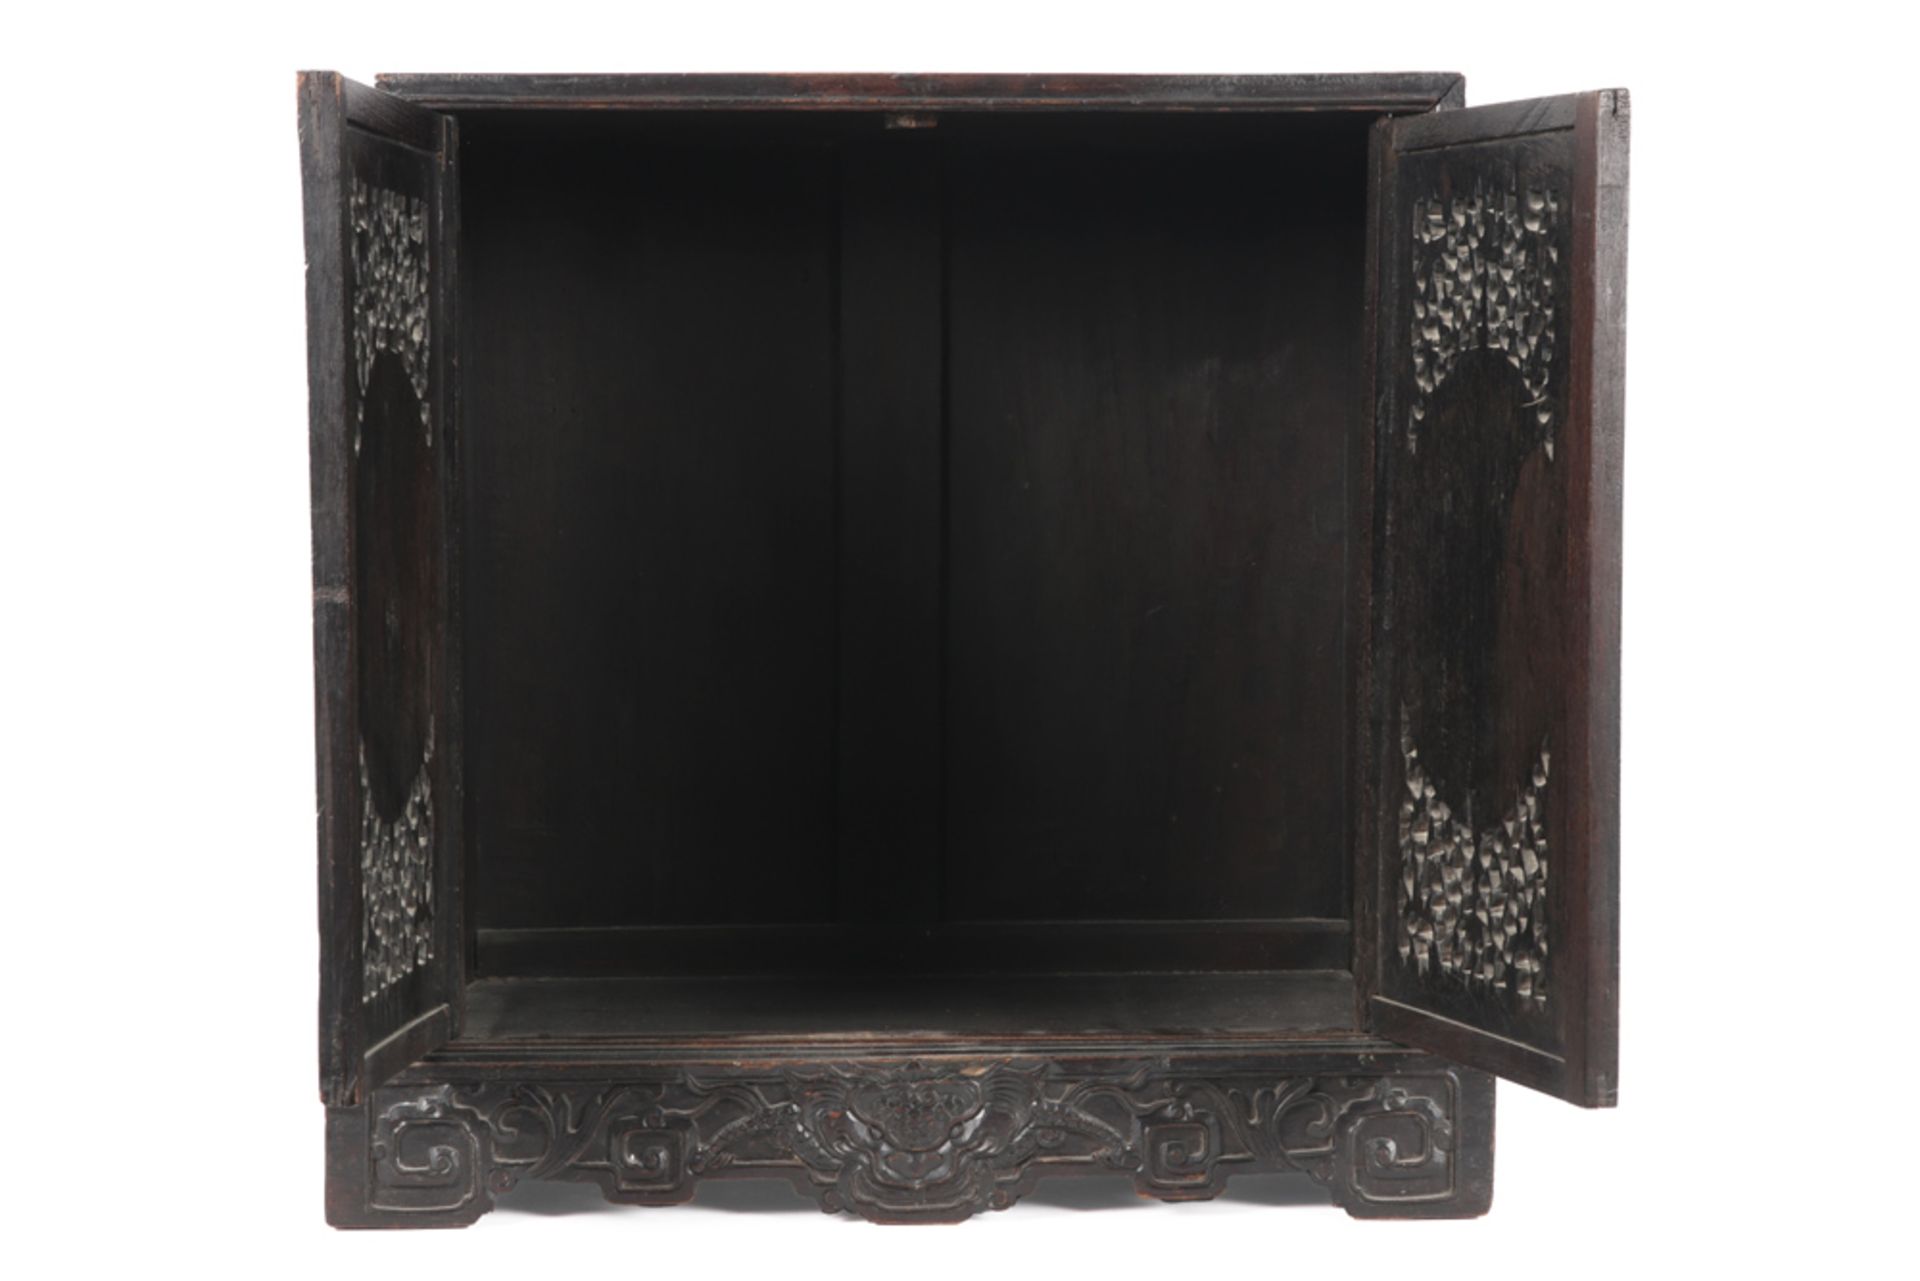 small antique Sino-Vietnamese cabinet with mother pearl inlay || Antiek Sino-Vietnamees kabinetje - Image 4 of 5